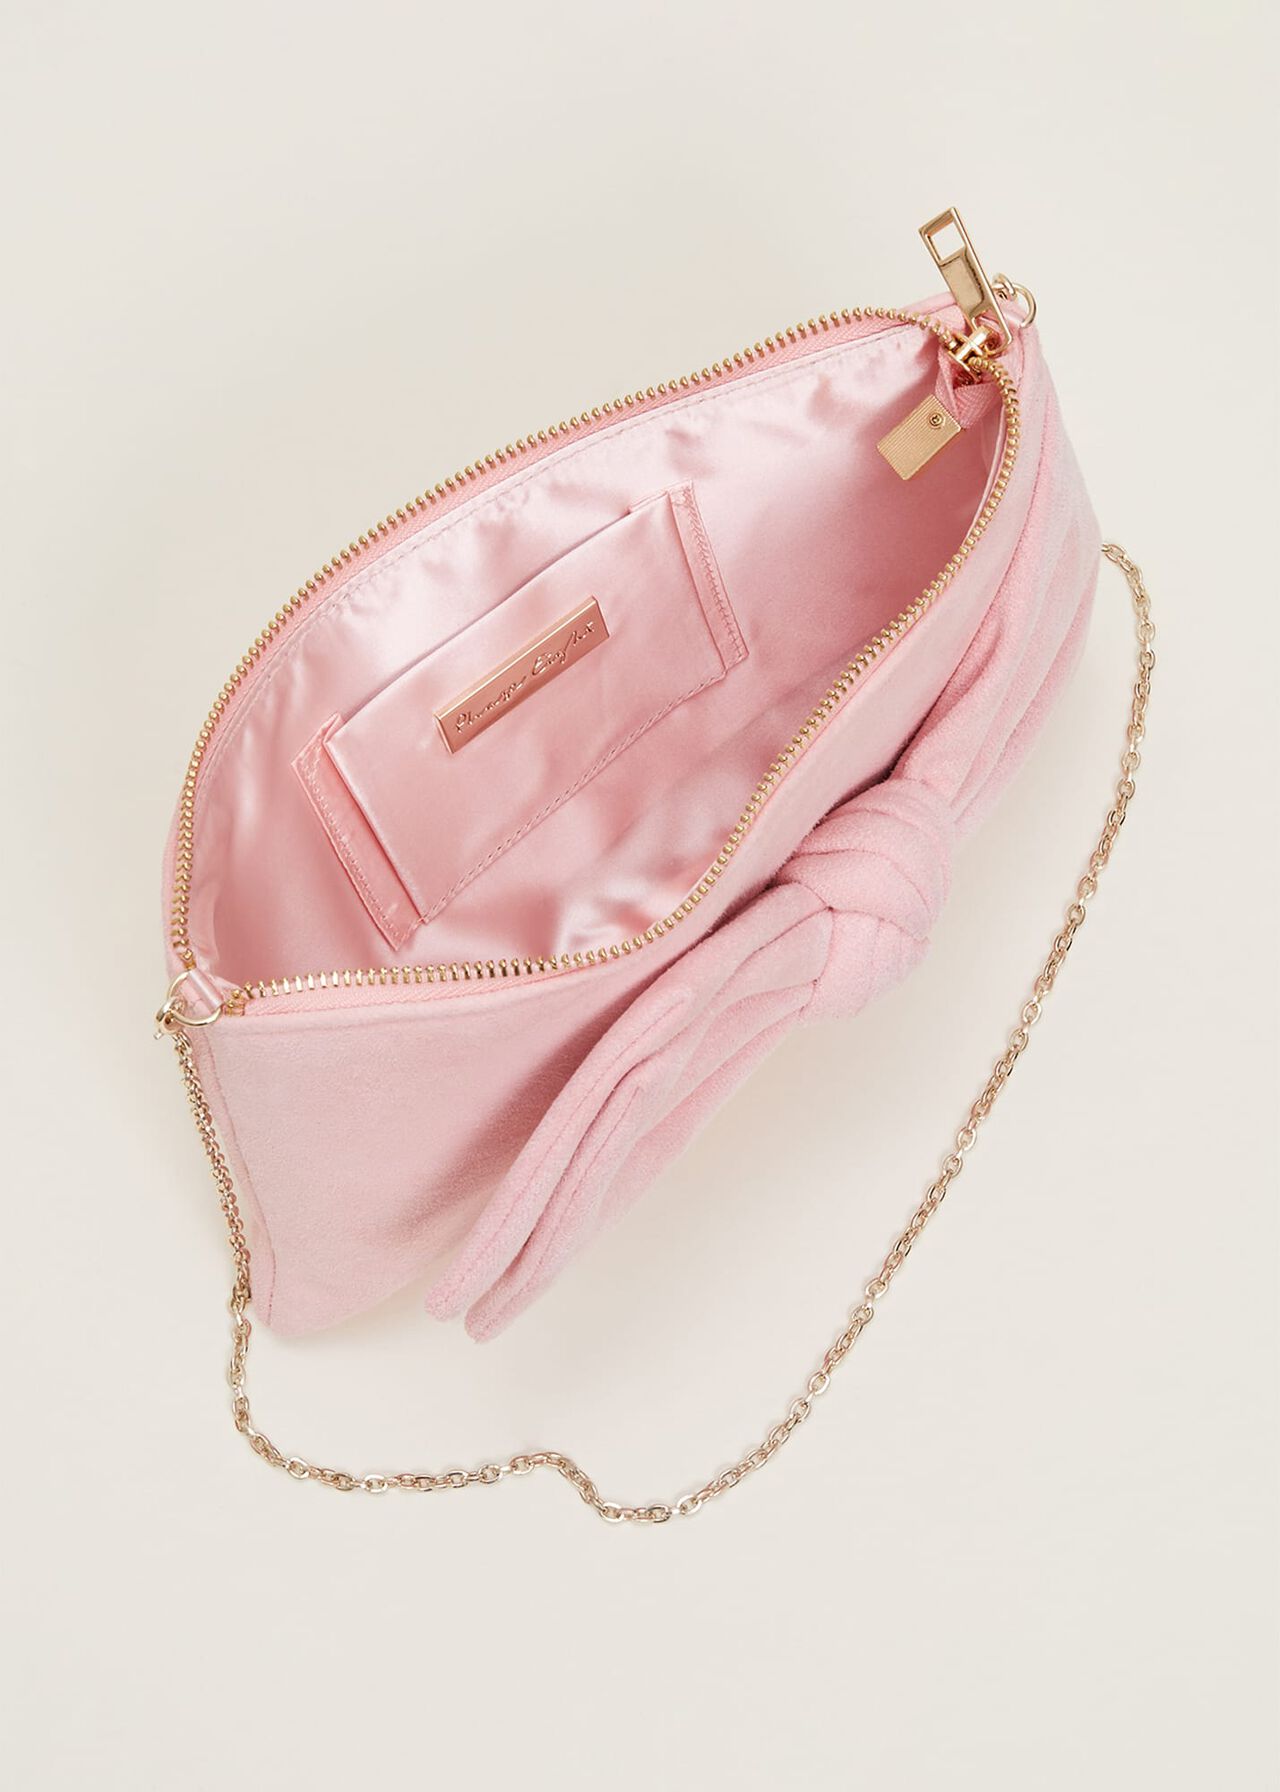 Pink Suede Bow Clutch Bag